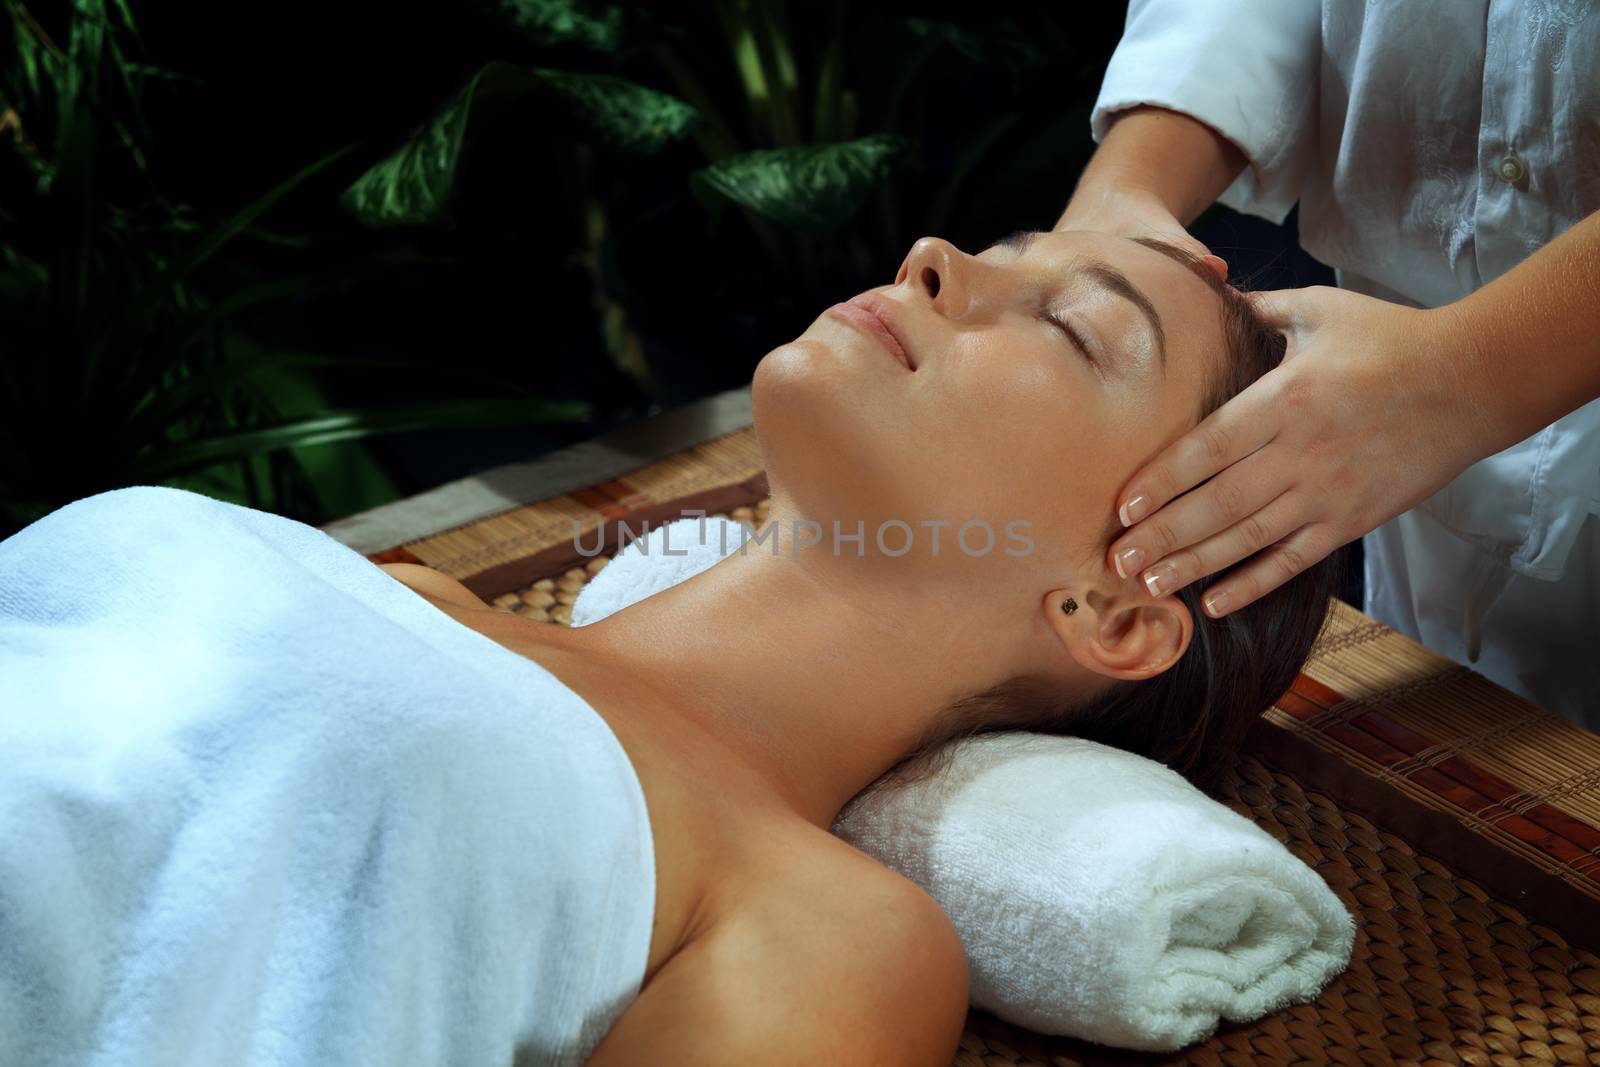 portrait of young beautiful woman in spa environment.